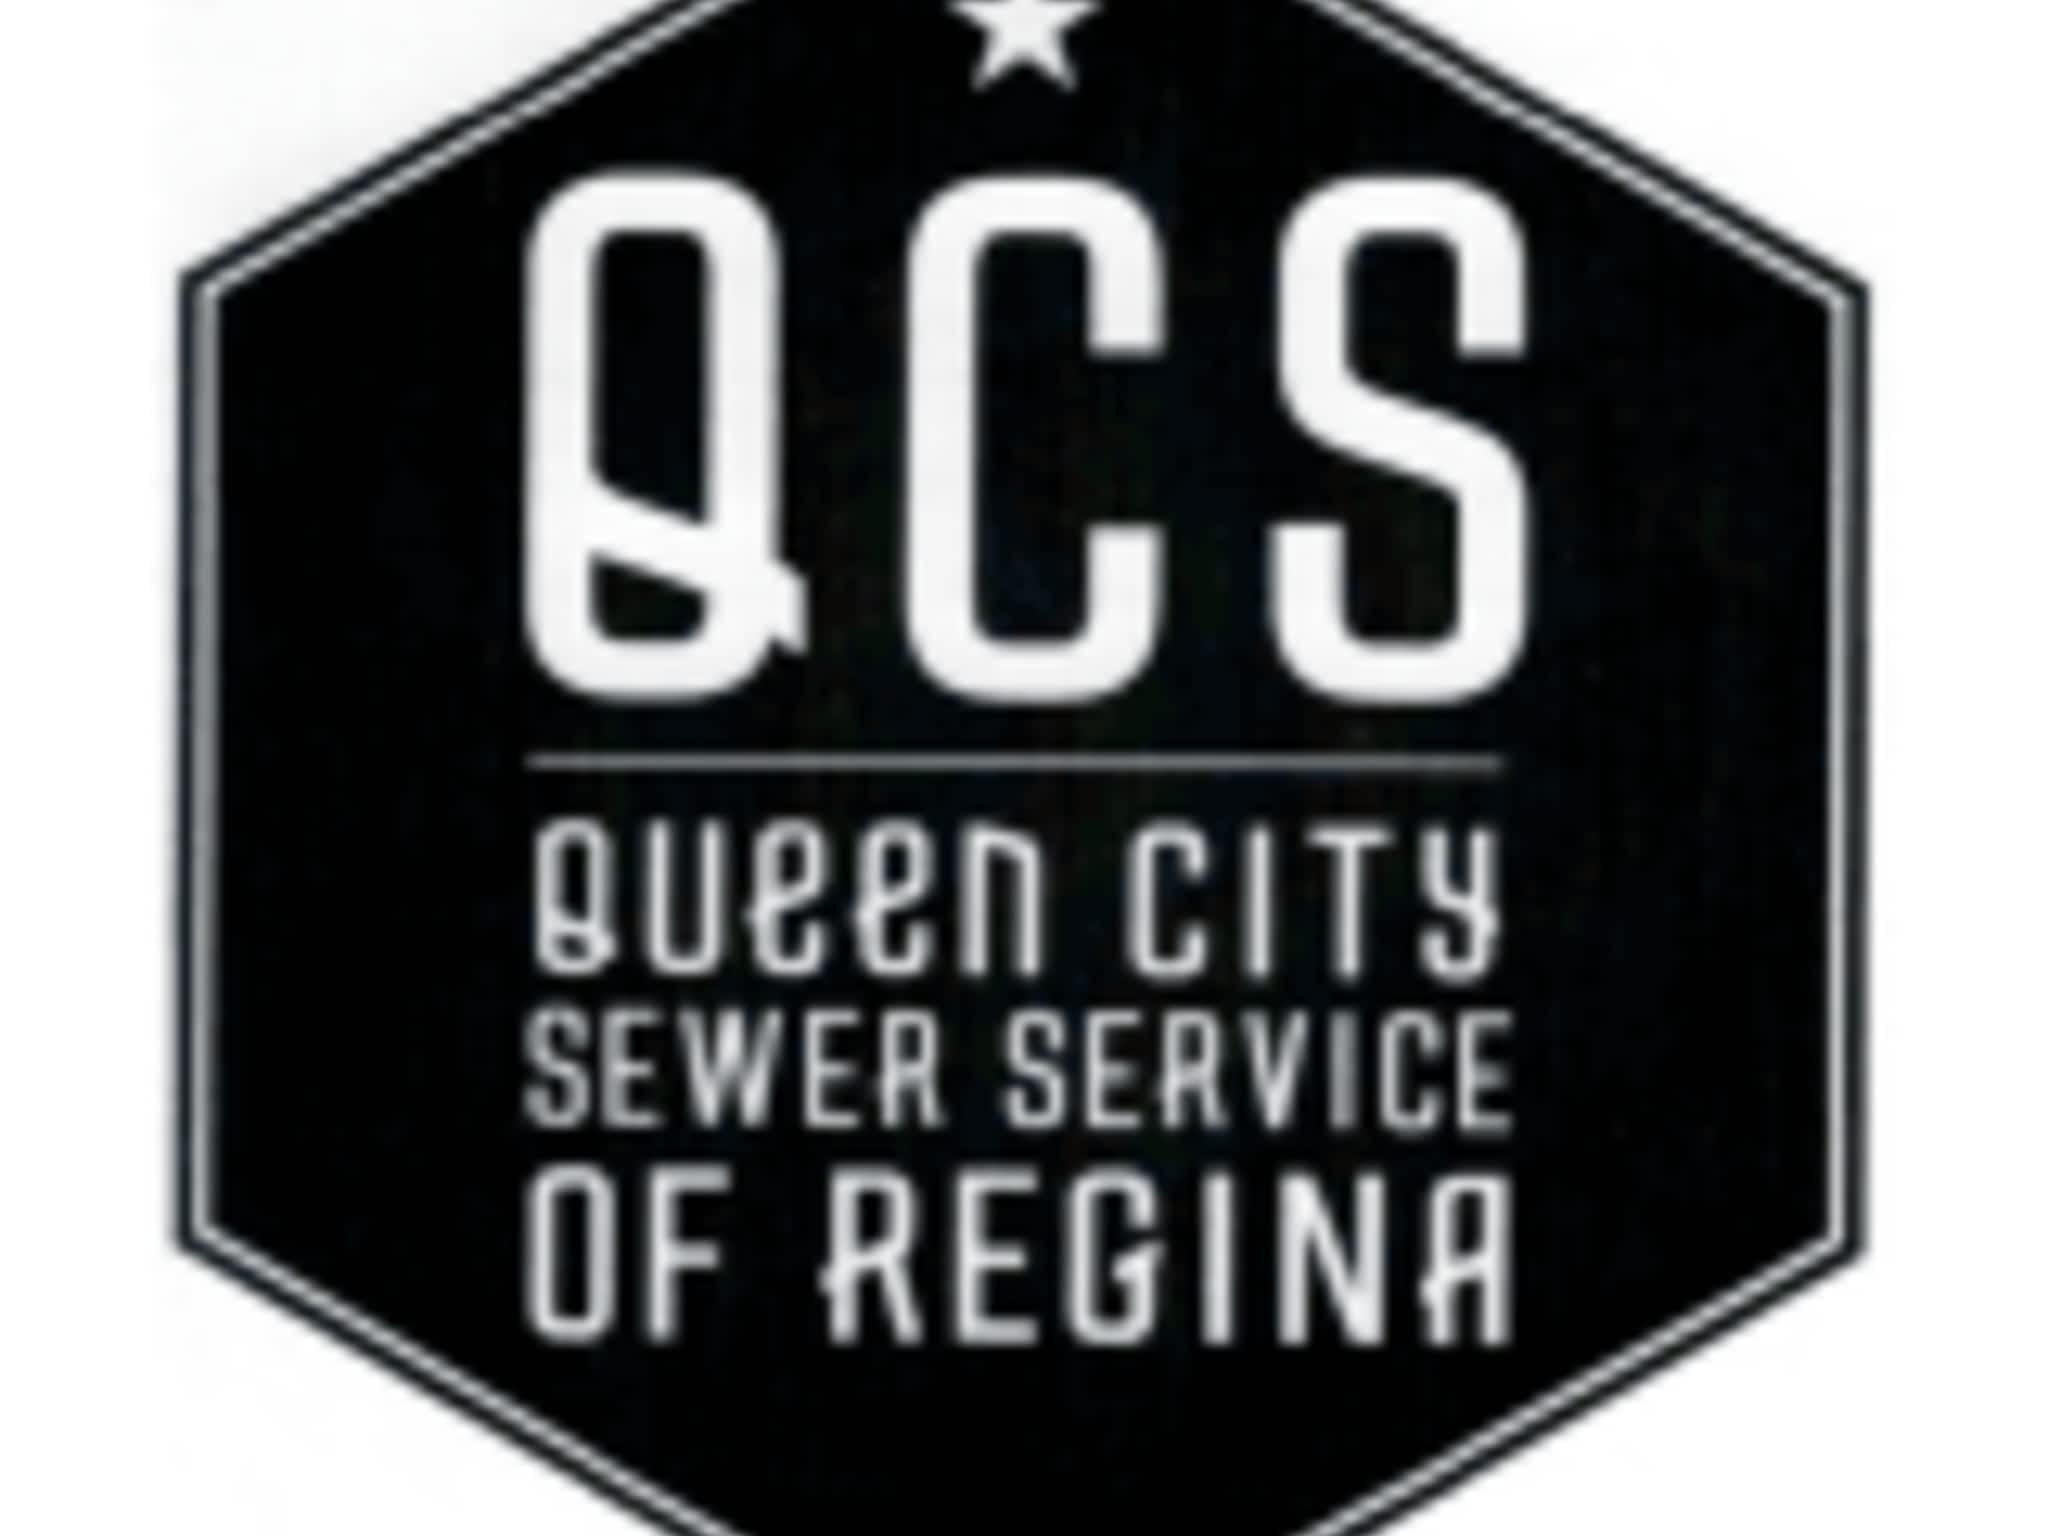 photo Queen City Sewer